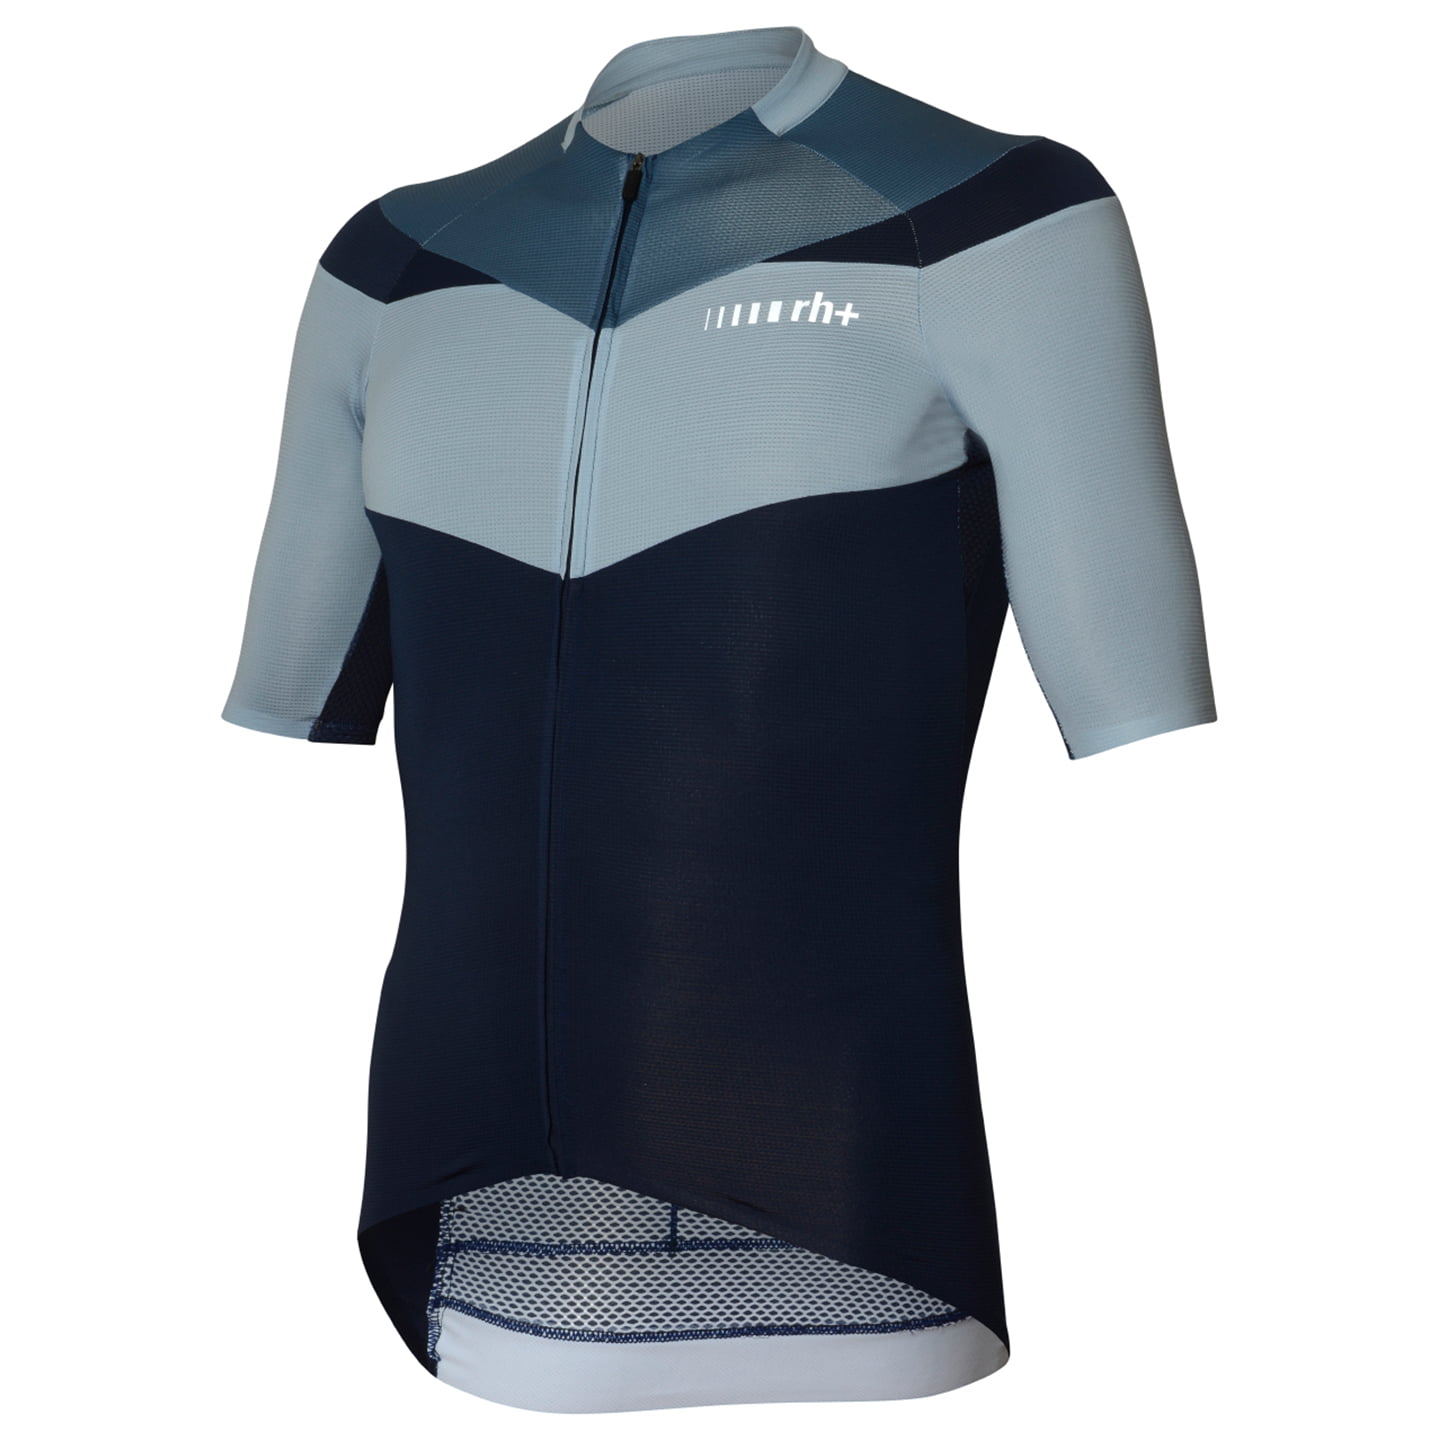 RH+ Team Short Sleeve Jersey Short Sleeve Jersey, for men, size M, Cycling jersey, Cycling clothing